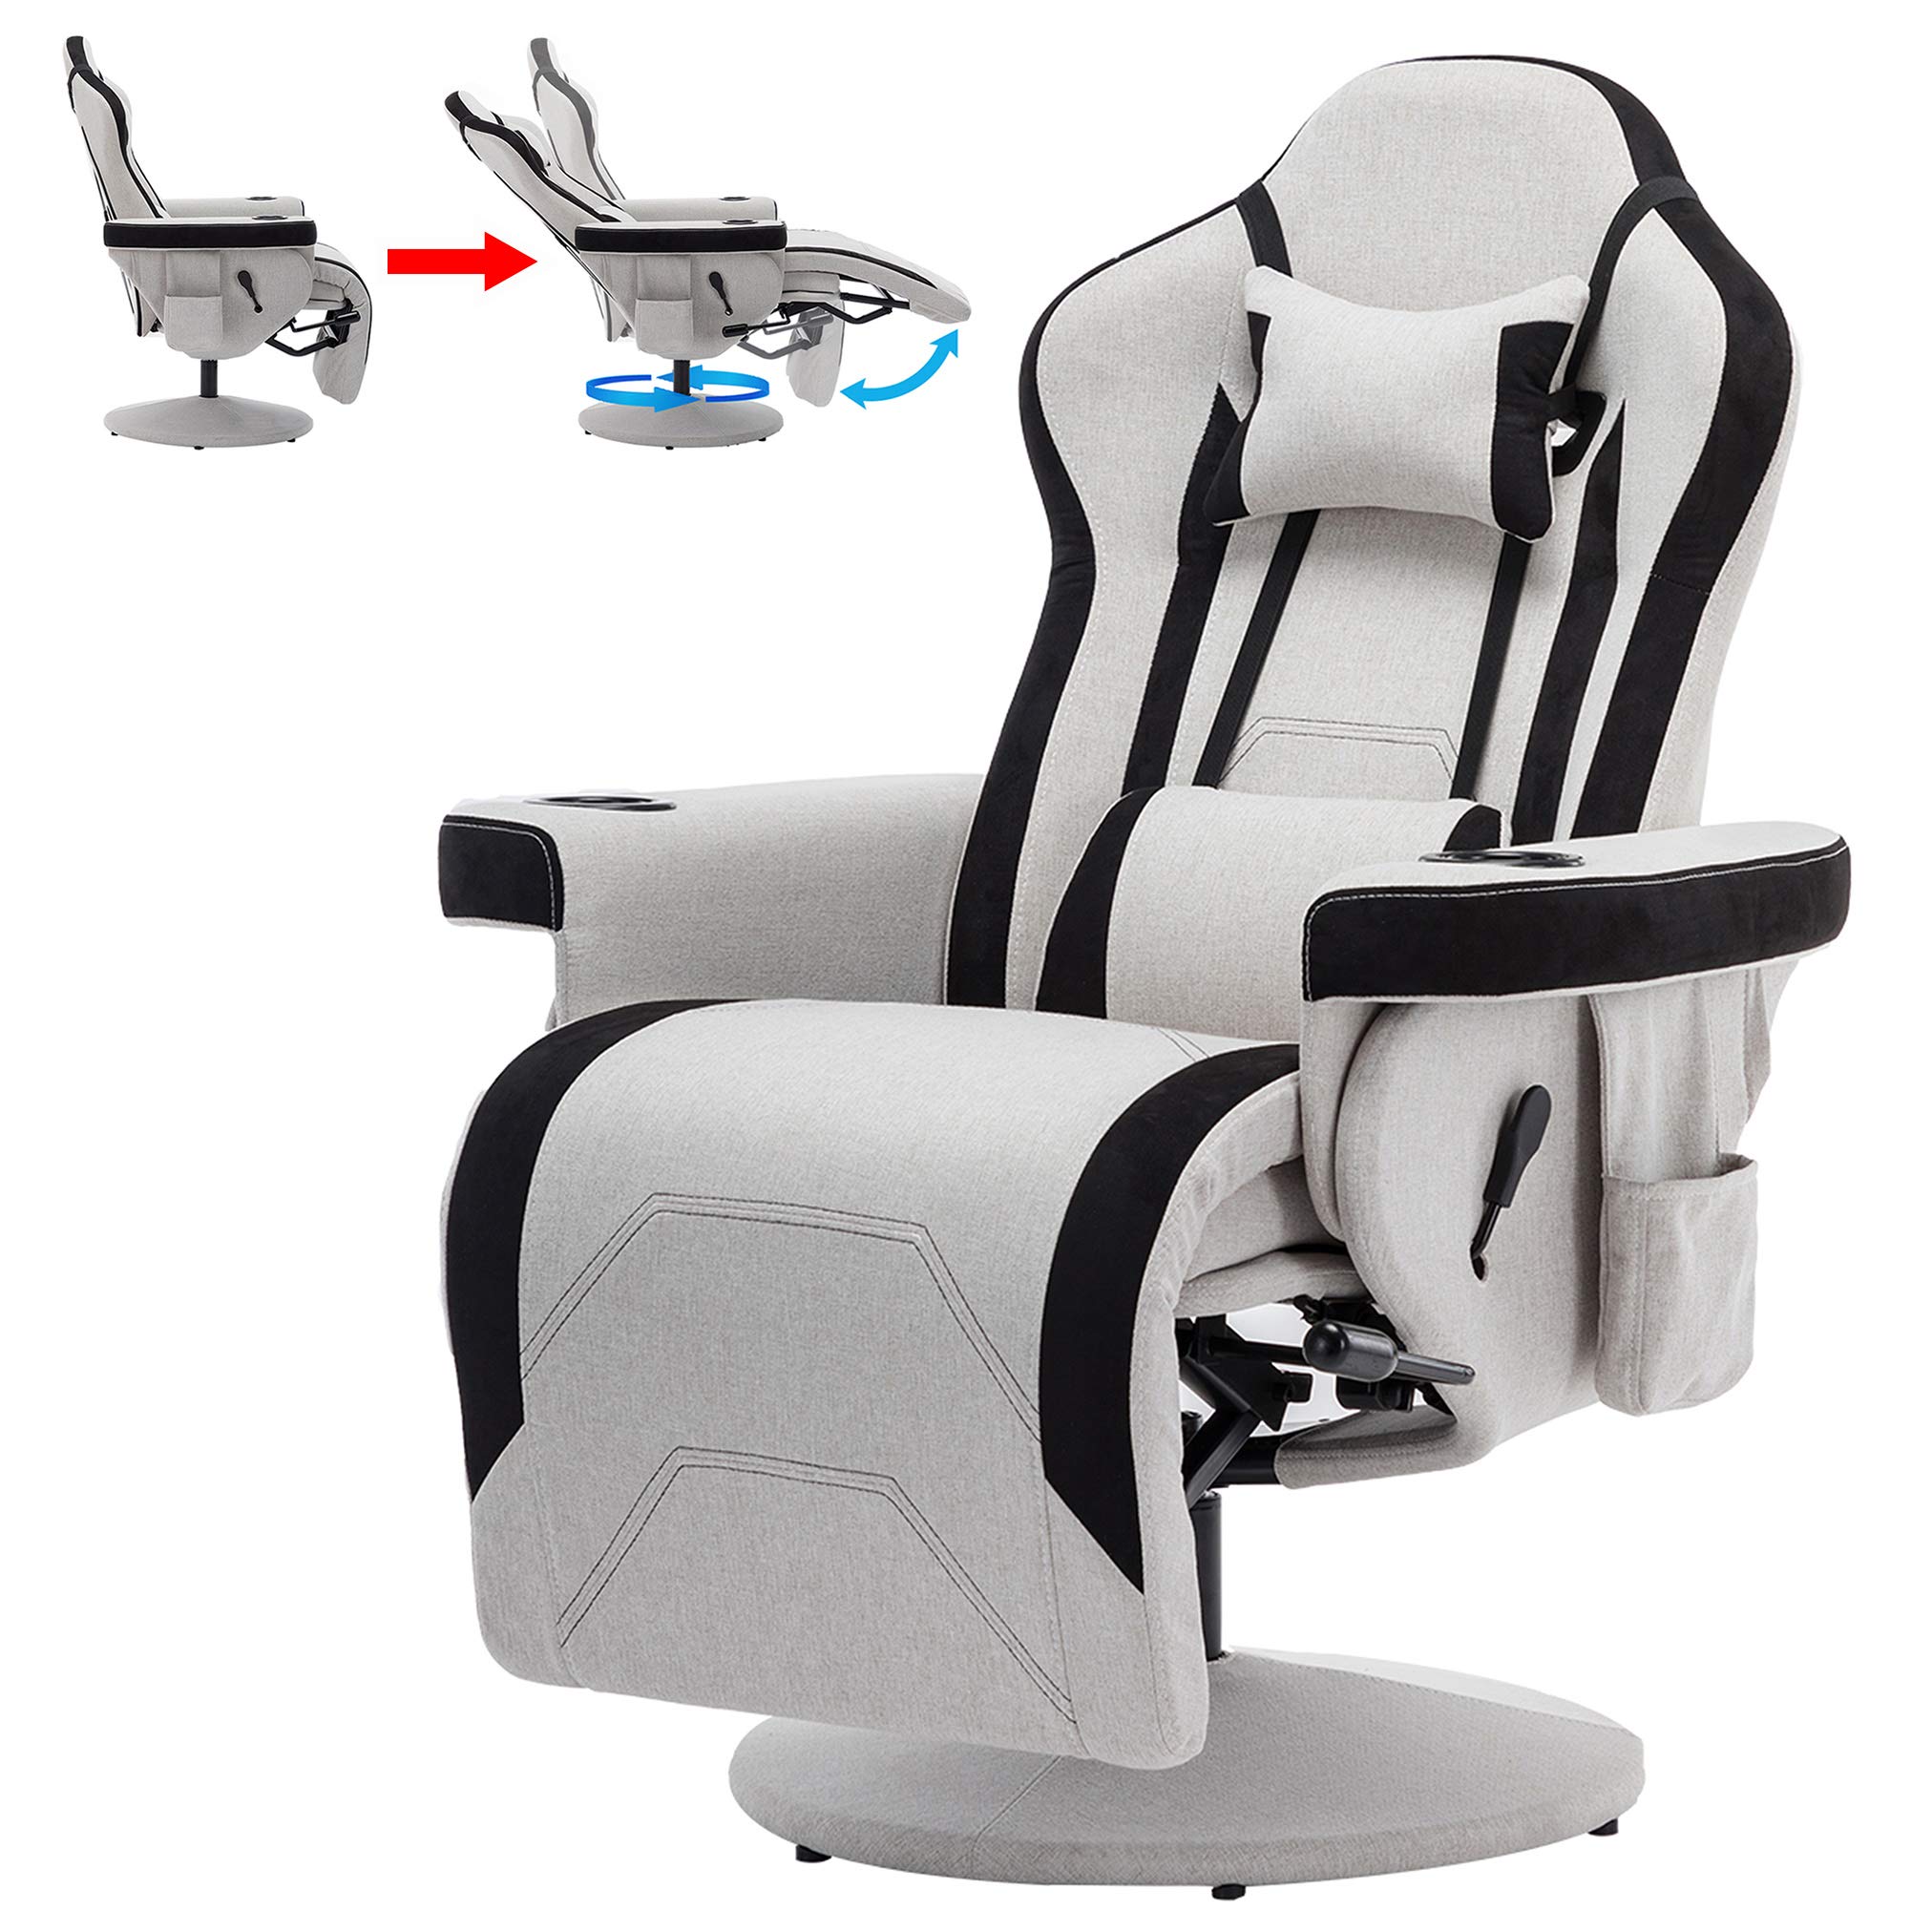 Amazon.com: WWXX Gaming Chair Big and Tall Office Chair with ...